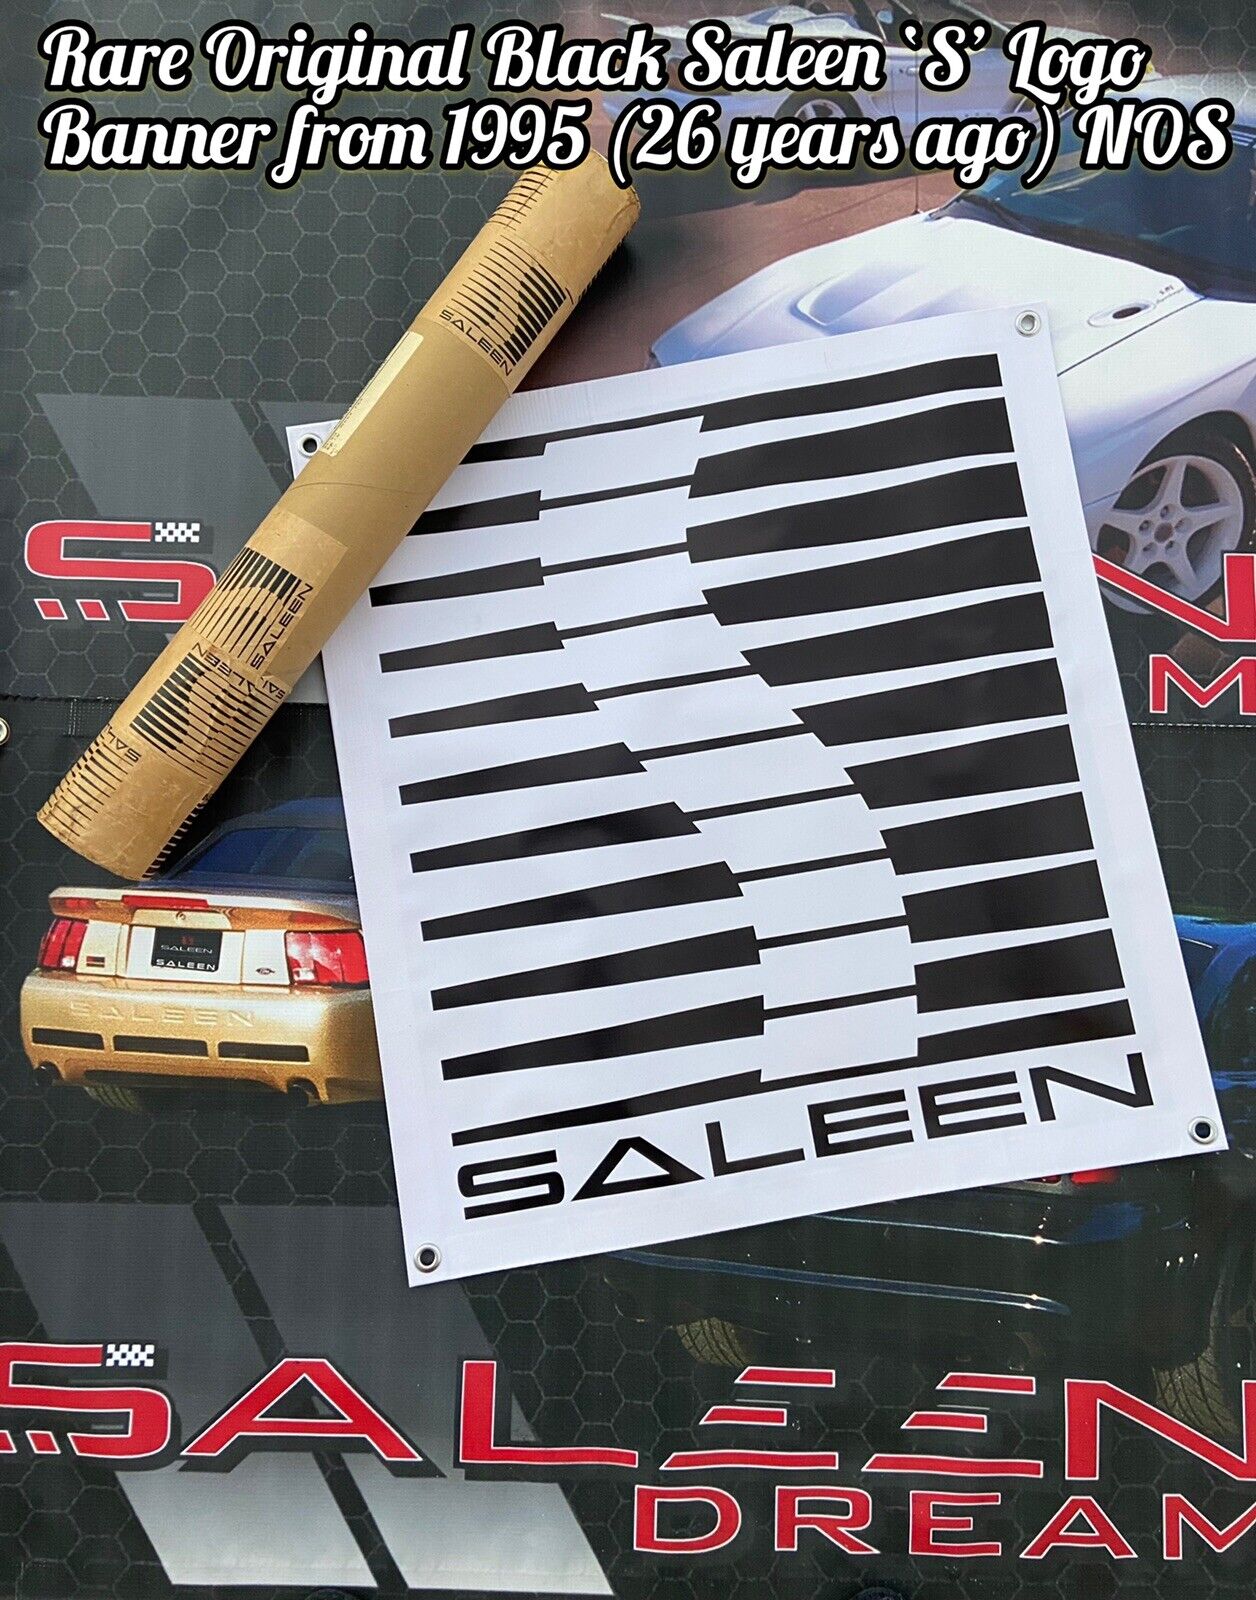 RARE LARGE SALEEN BLK S LOGO BANNER FRM 1995 S351 MUSTANG FORD COBRA GT SHELBY